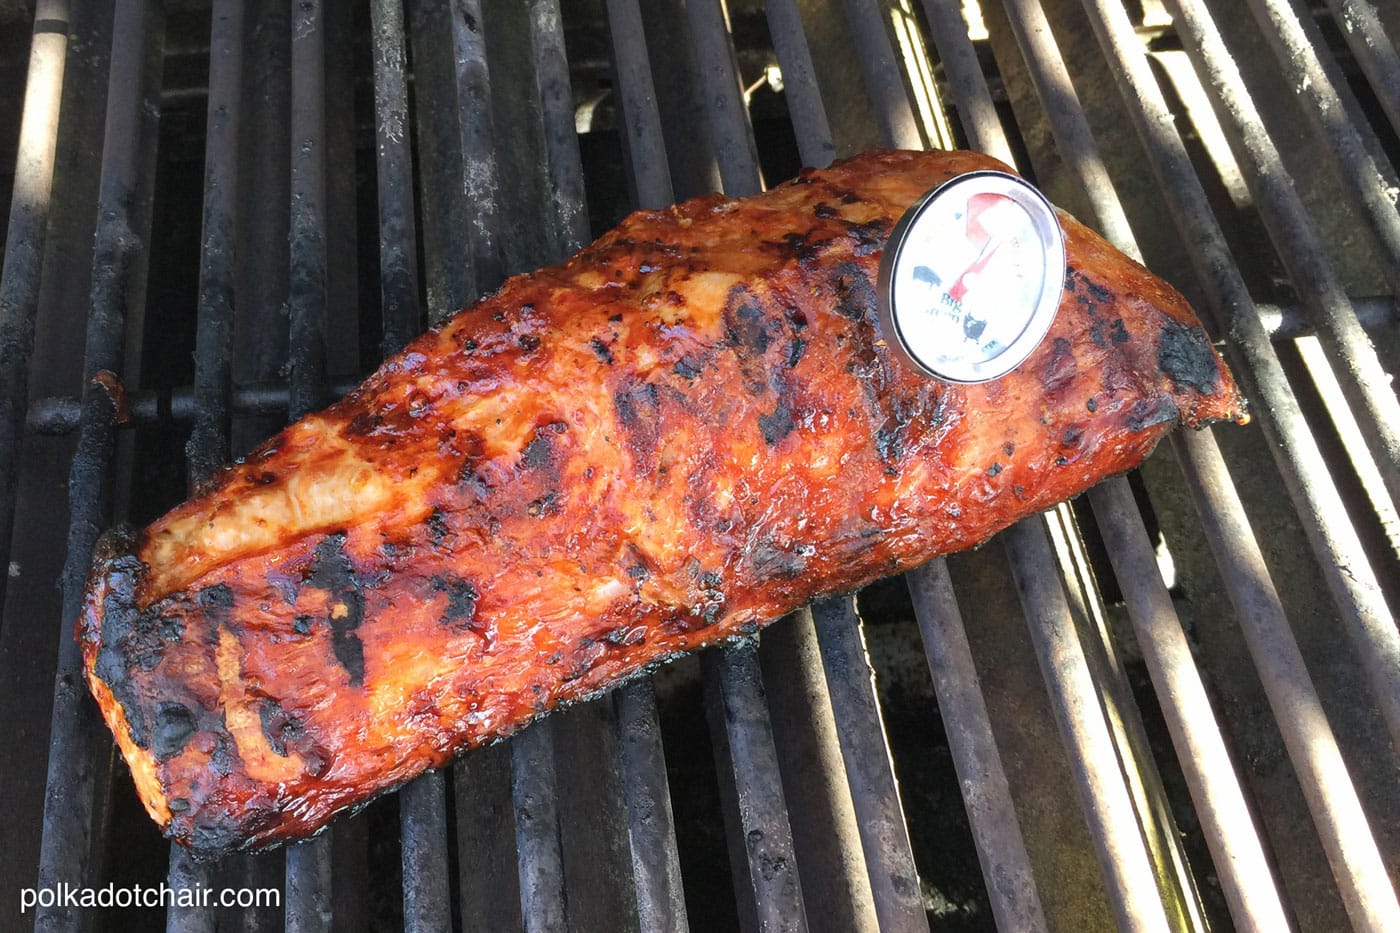 Recipe for Mesquite Grilled Pork Loin, great easy weeknight dinner idea, just cook it on the grill! 